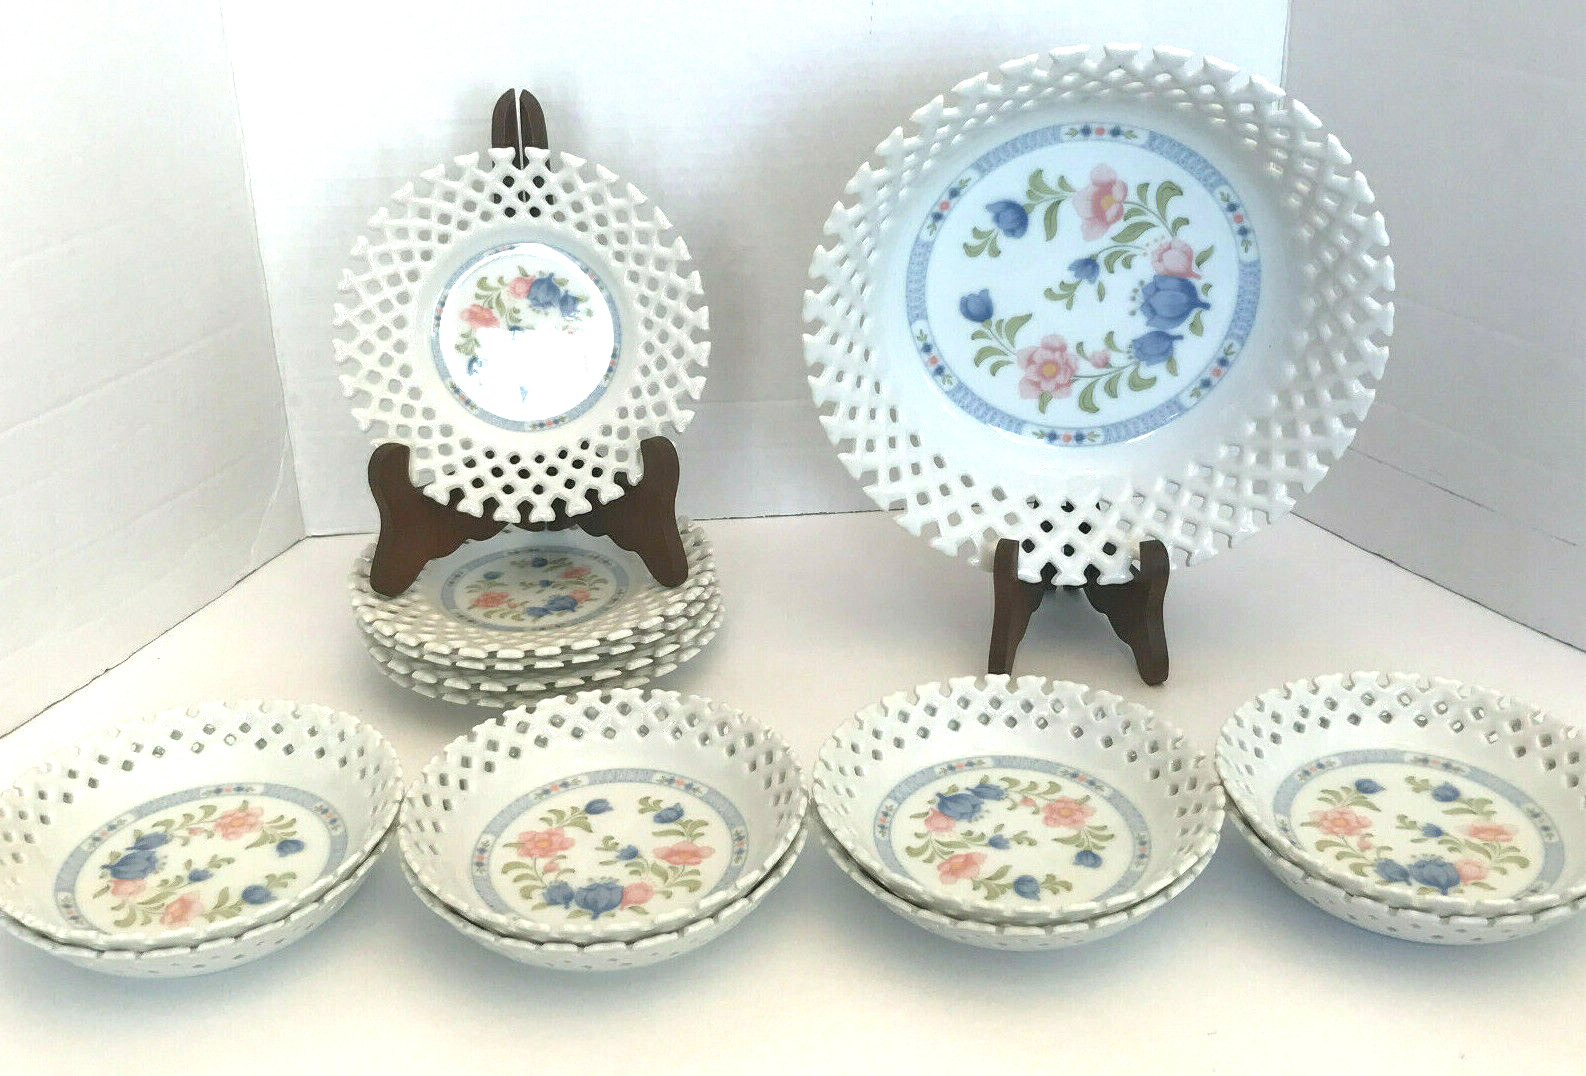 Keito Marianne 14 Pieces Inglaze China White Porcelain Made In Japan Vintage